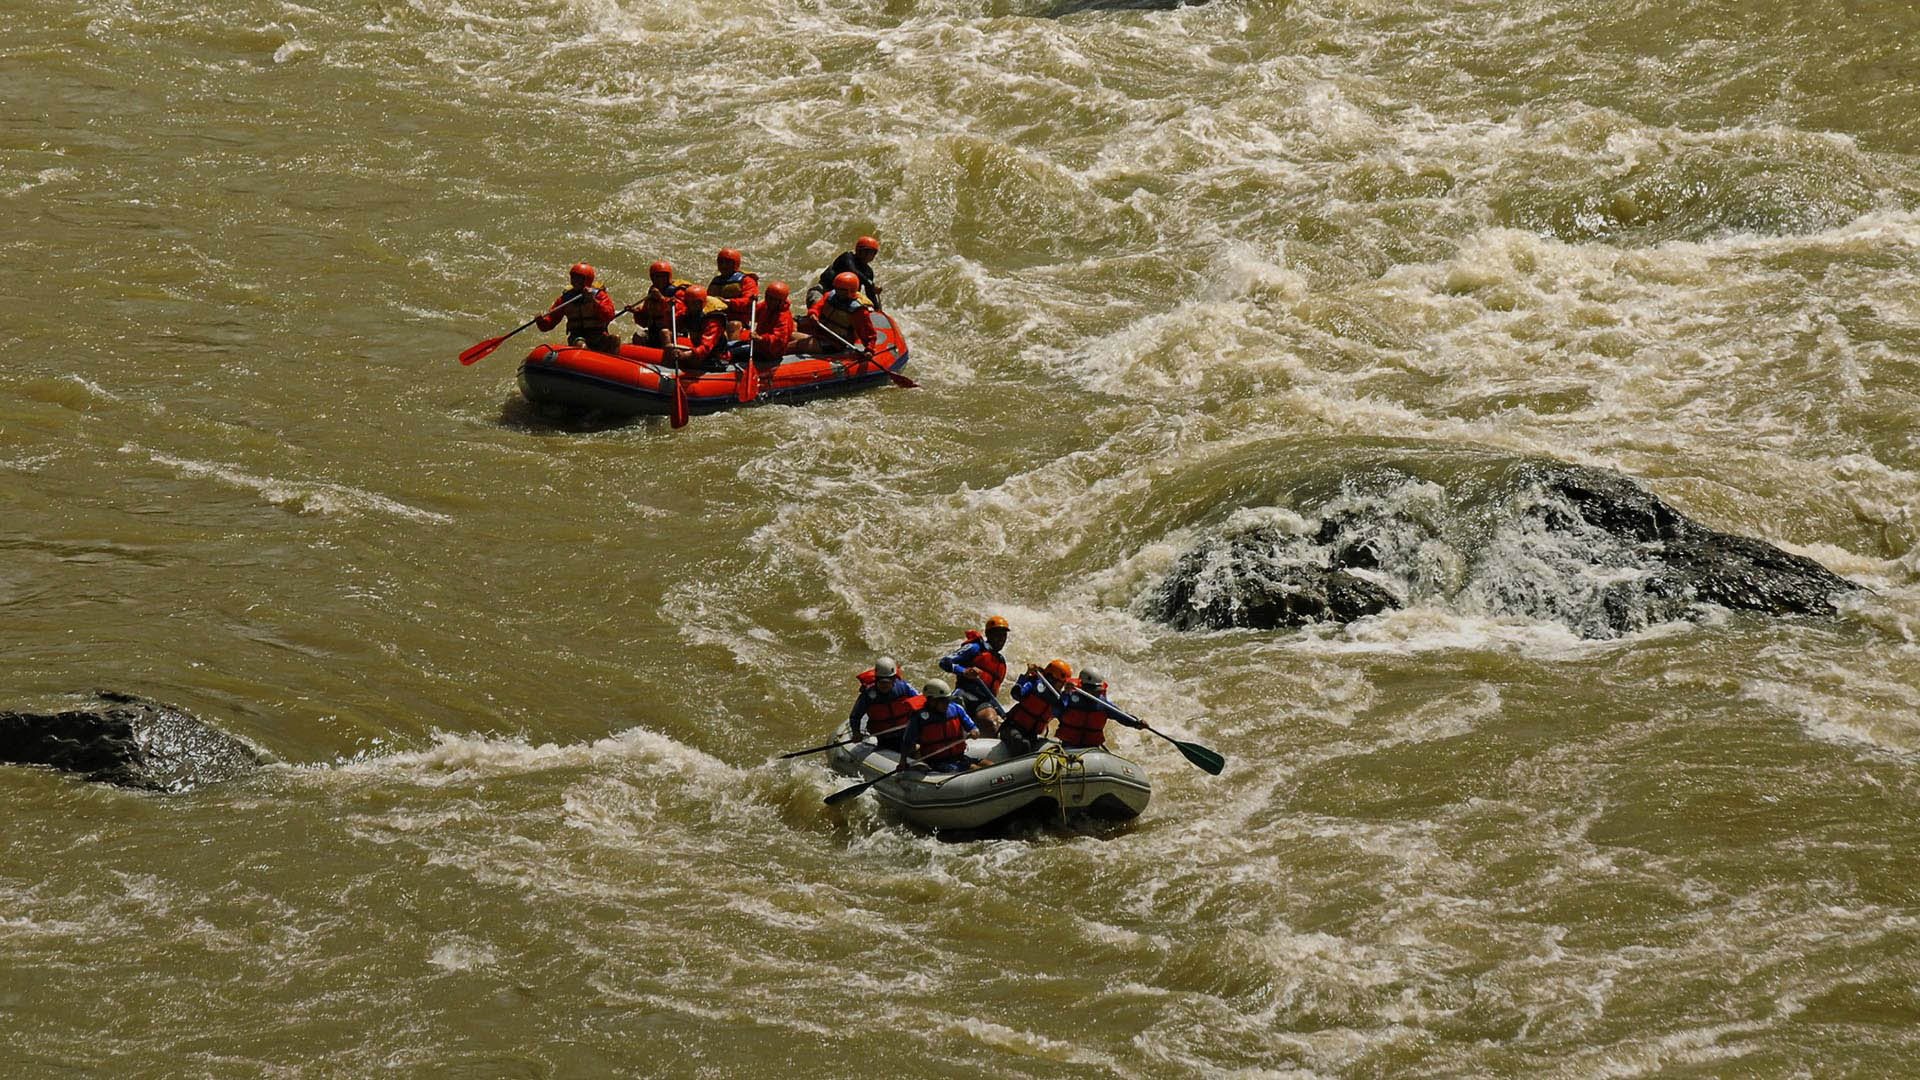 Rafting in the Colca River